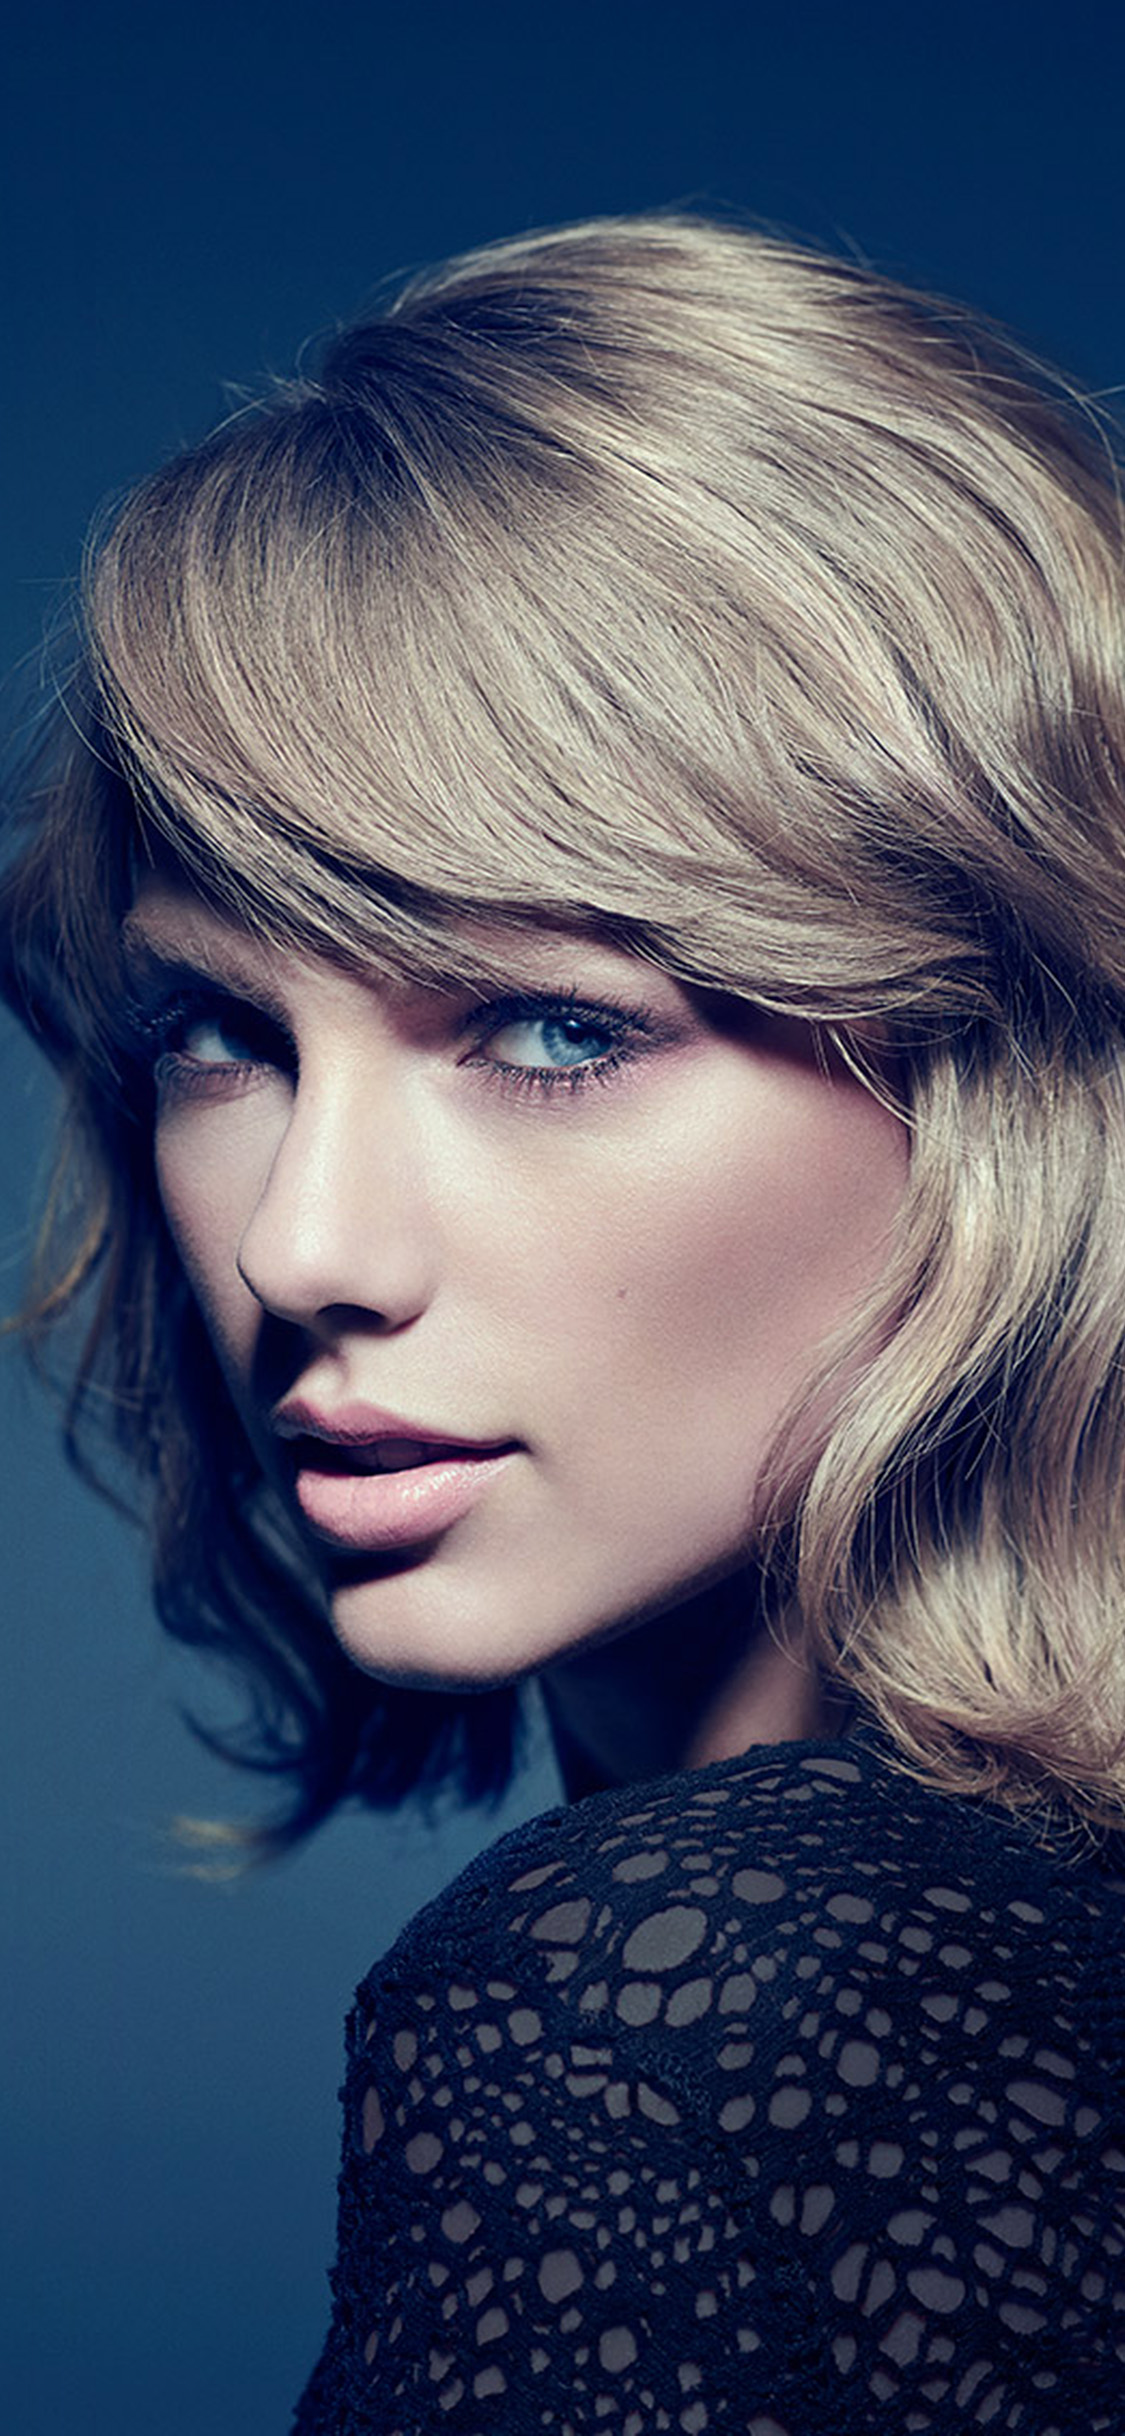 iPhone X wallpaper. taylor swift girl music face photoshoot celebrity